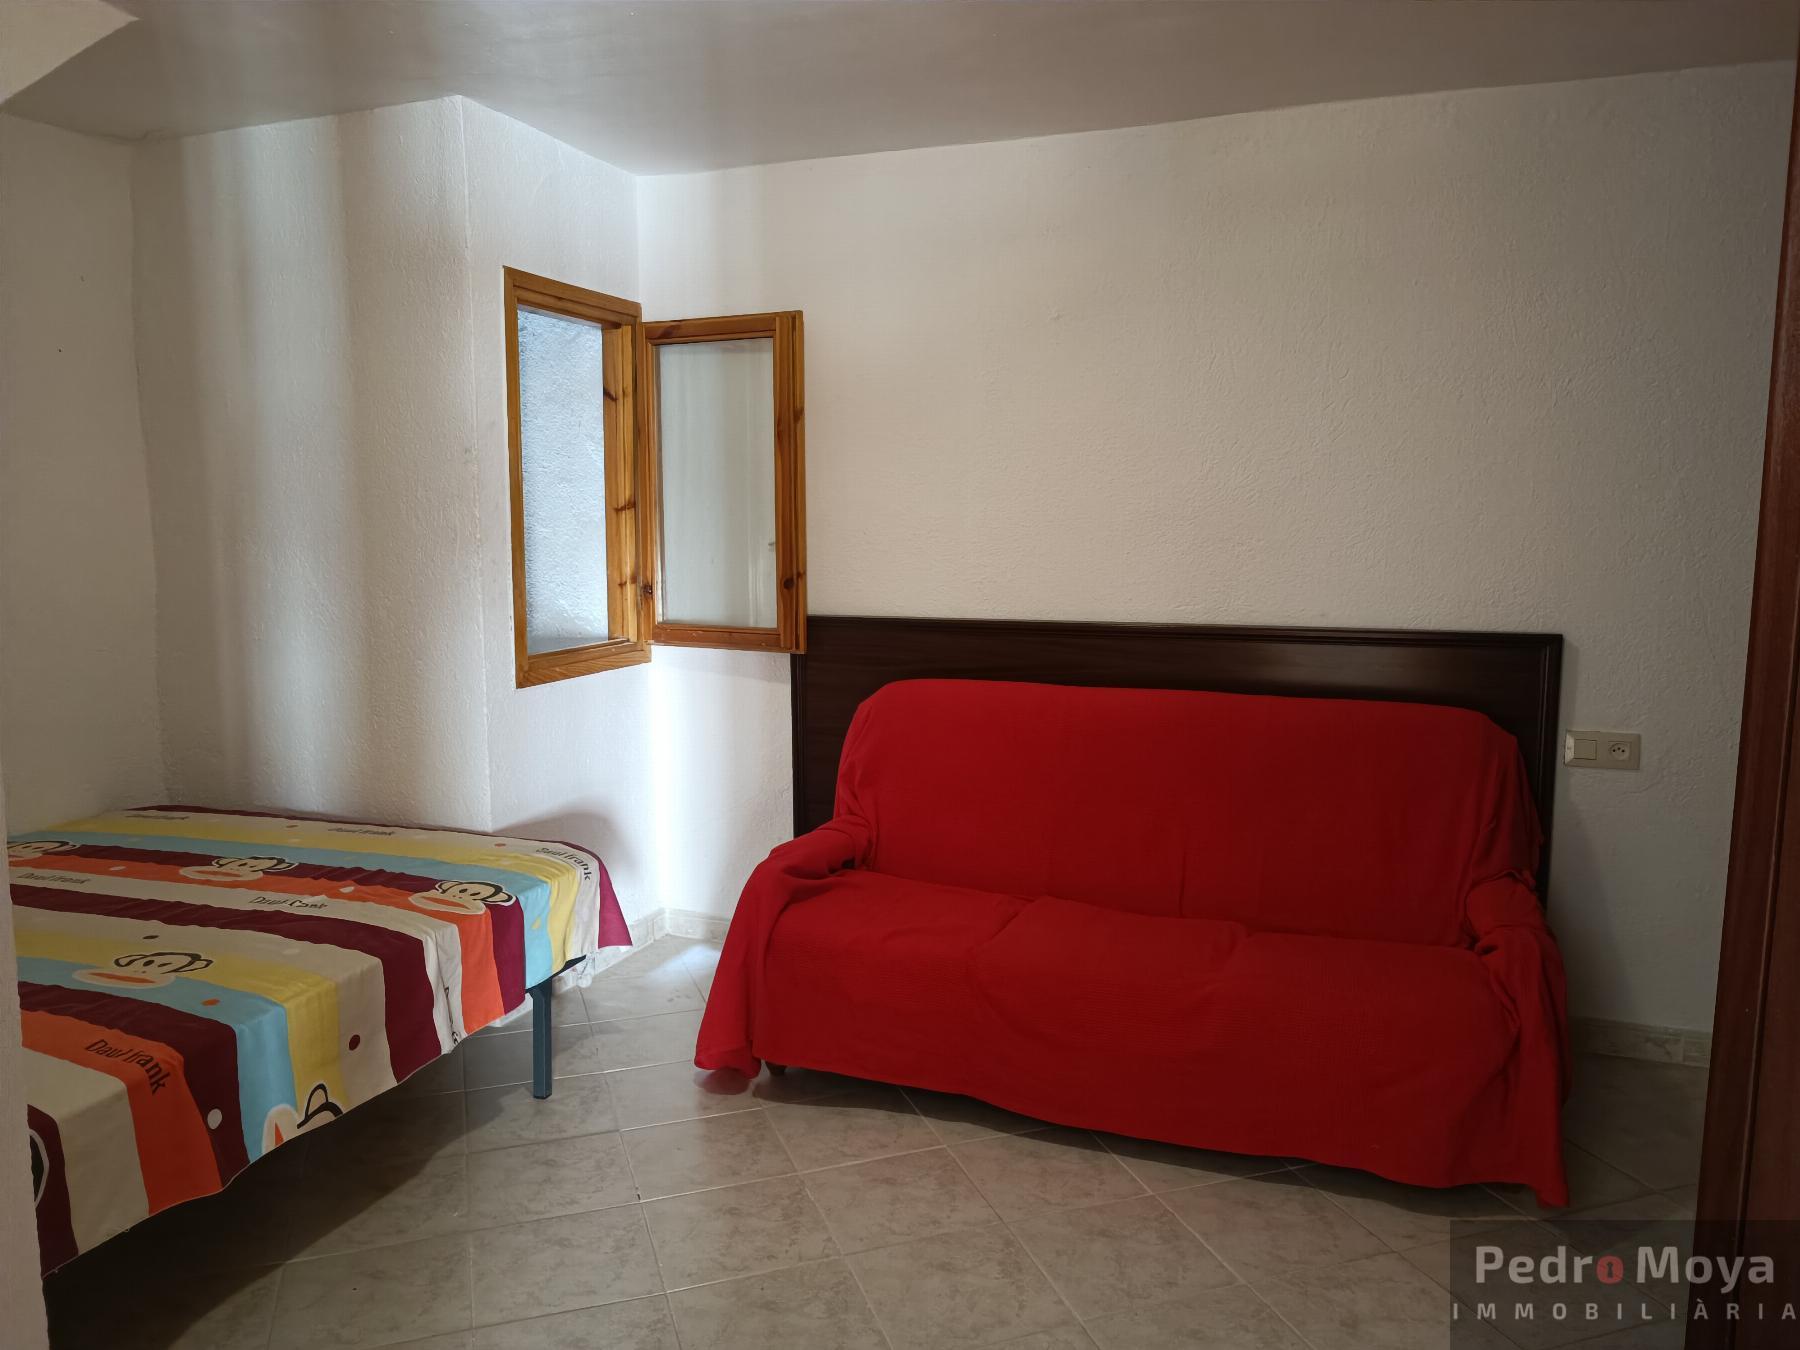 For sale of house in La Seu d´Urgell